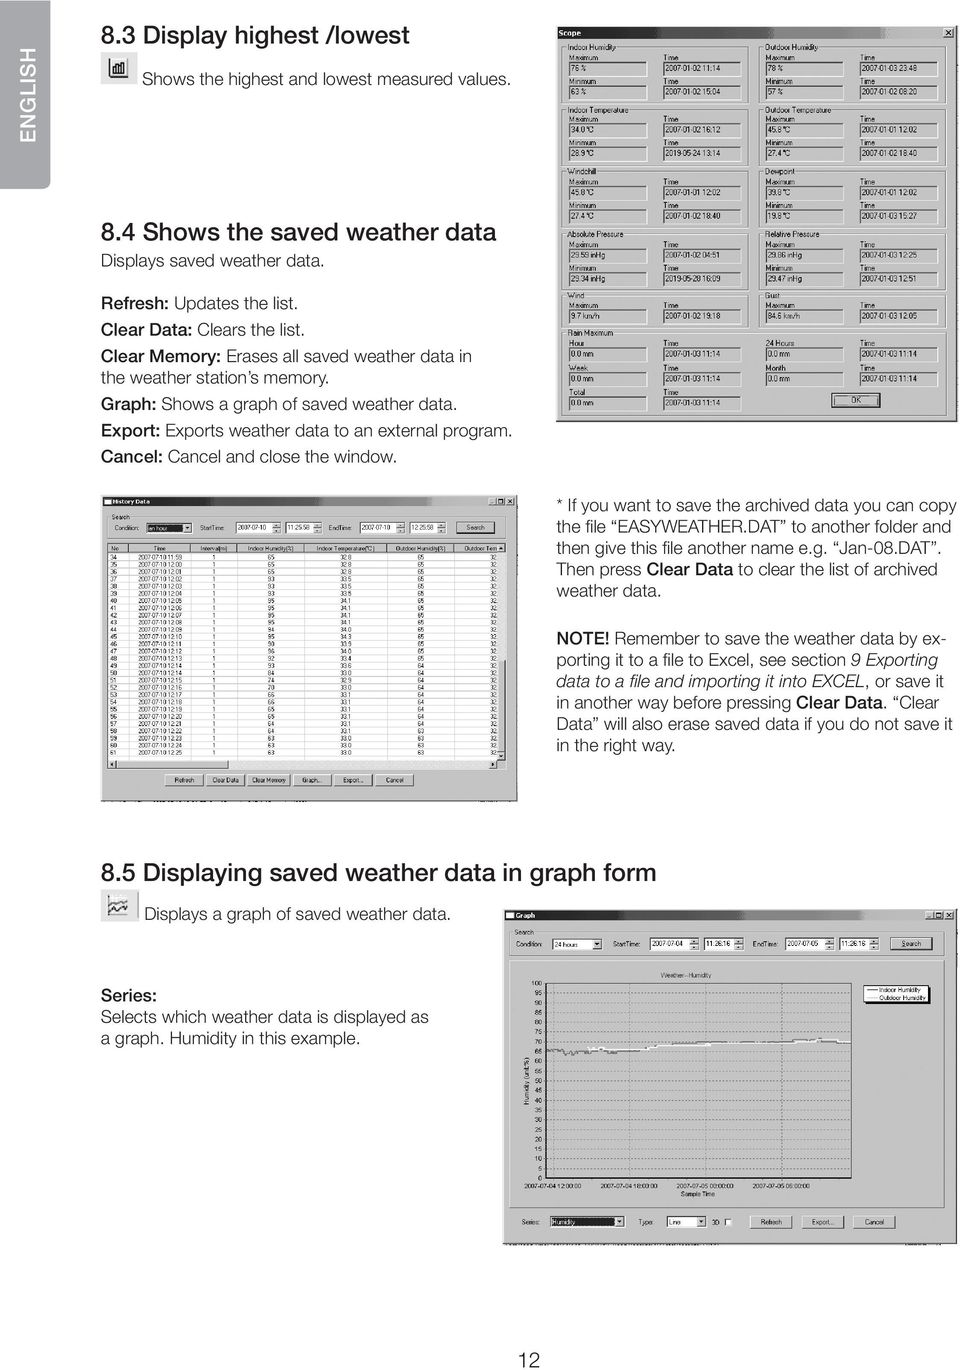 Cancel: Cancel and close the window. * If you want to save the archived data you can copy the file EASYWEATHER.DAT to another folder and then give this file another name e.g. Jan-08.DAT. Then press Clear Data to clear the list of archived weather data.